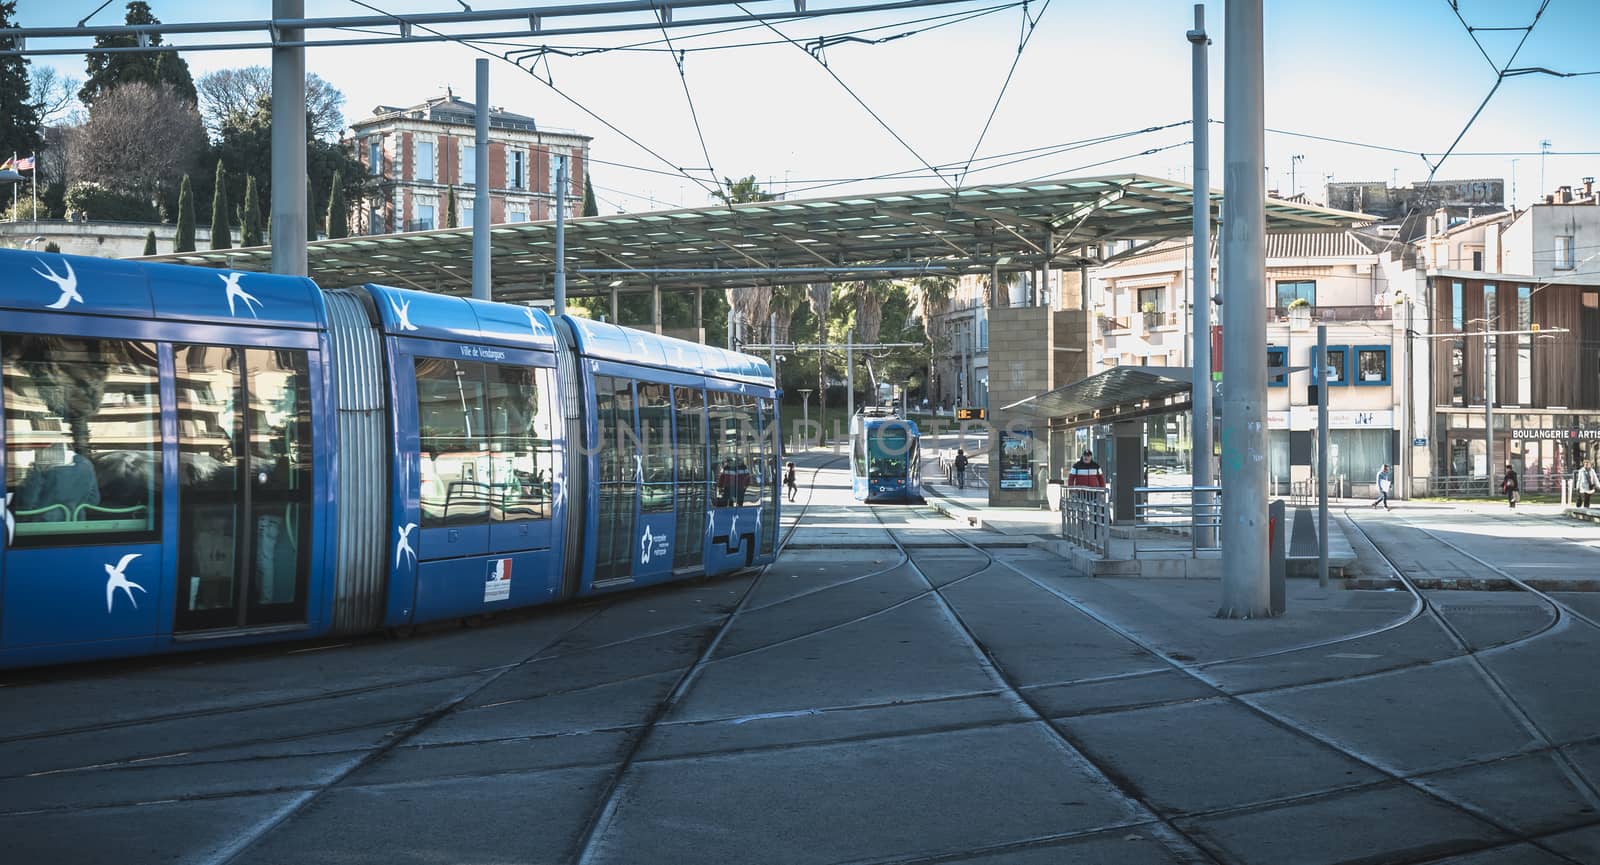 Montpellier, France - January 2, 2019: electric tramway passing the Corum, a convention center and Opera Berlioz on a winter day